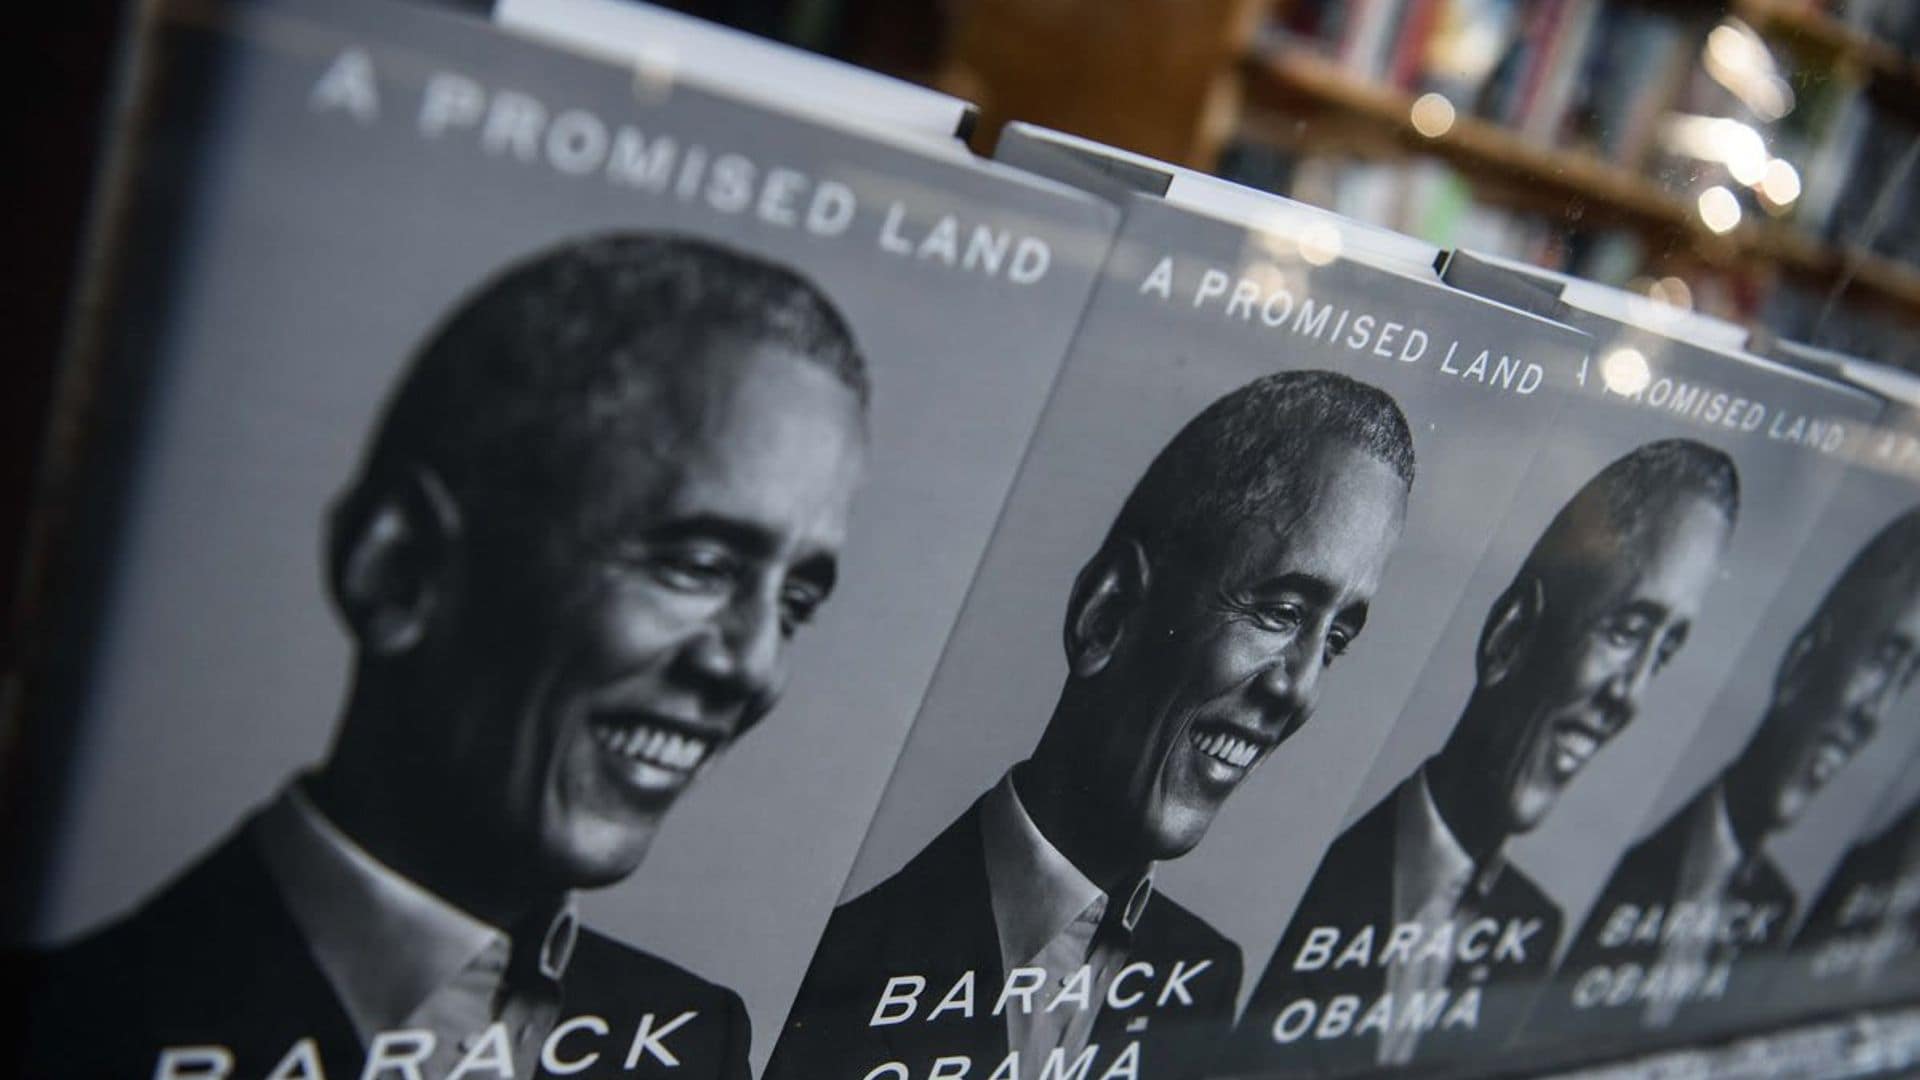 Former US President Barack Obama's new book "A Promised Land" is seen in a bookstore in Washington, DC, on November 17, 2020.